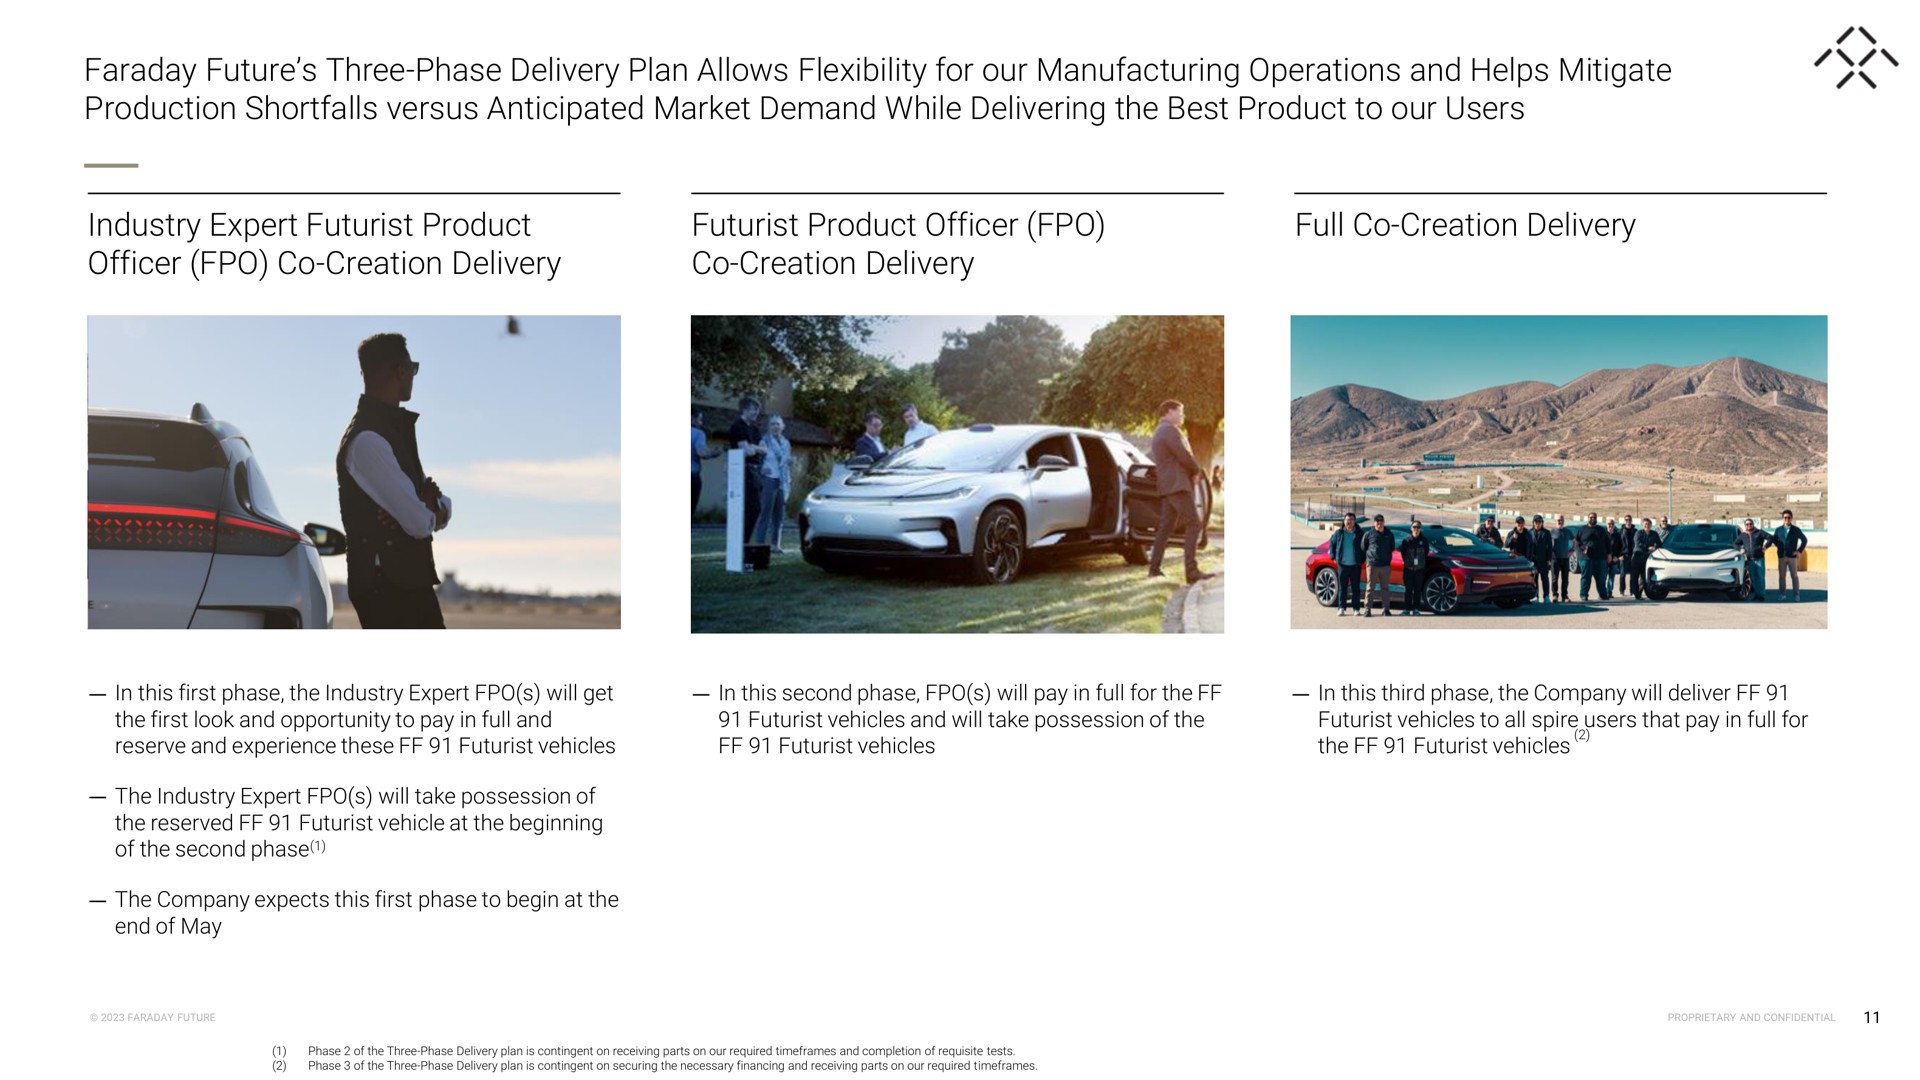 faraday future three phase delivery plan allows flexibility for our manufacturing operations and helps mitigate production shortfalls versus anticipated market demand while delivering the best product to our users industry expert futurist product officer creation delivery futurist product officer creation delivery full creation delivery | Faraday Future